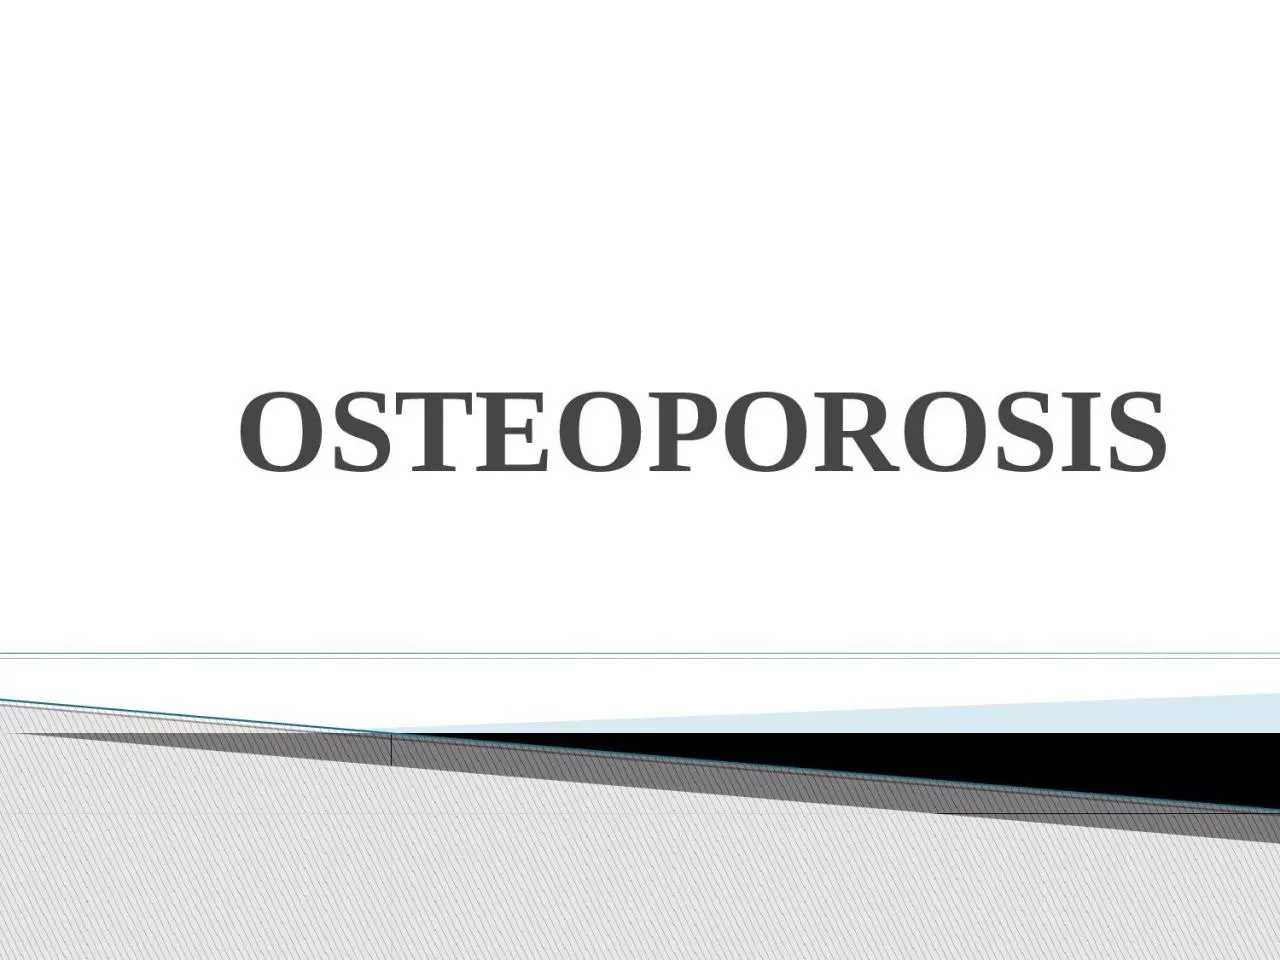 OSTEOPOROSIS Osteoporosis is a ‘ systematic skeletal disease characterized by low bone